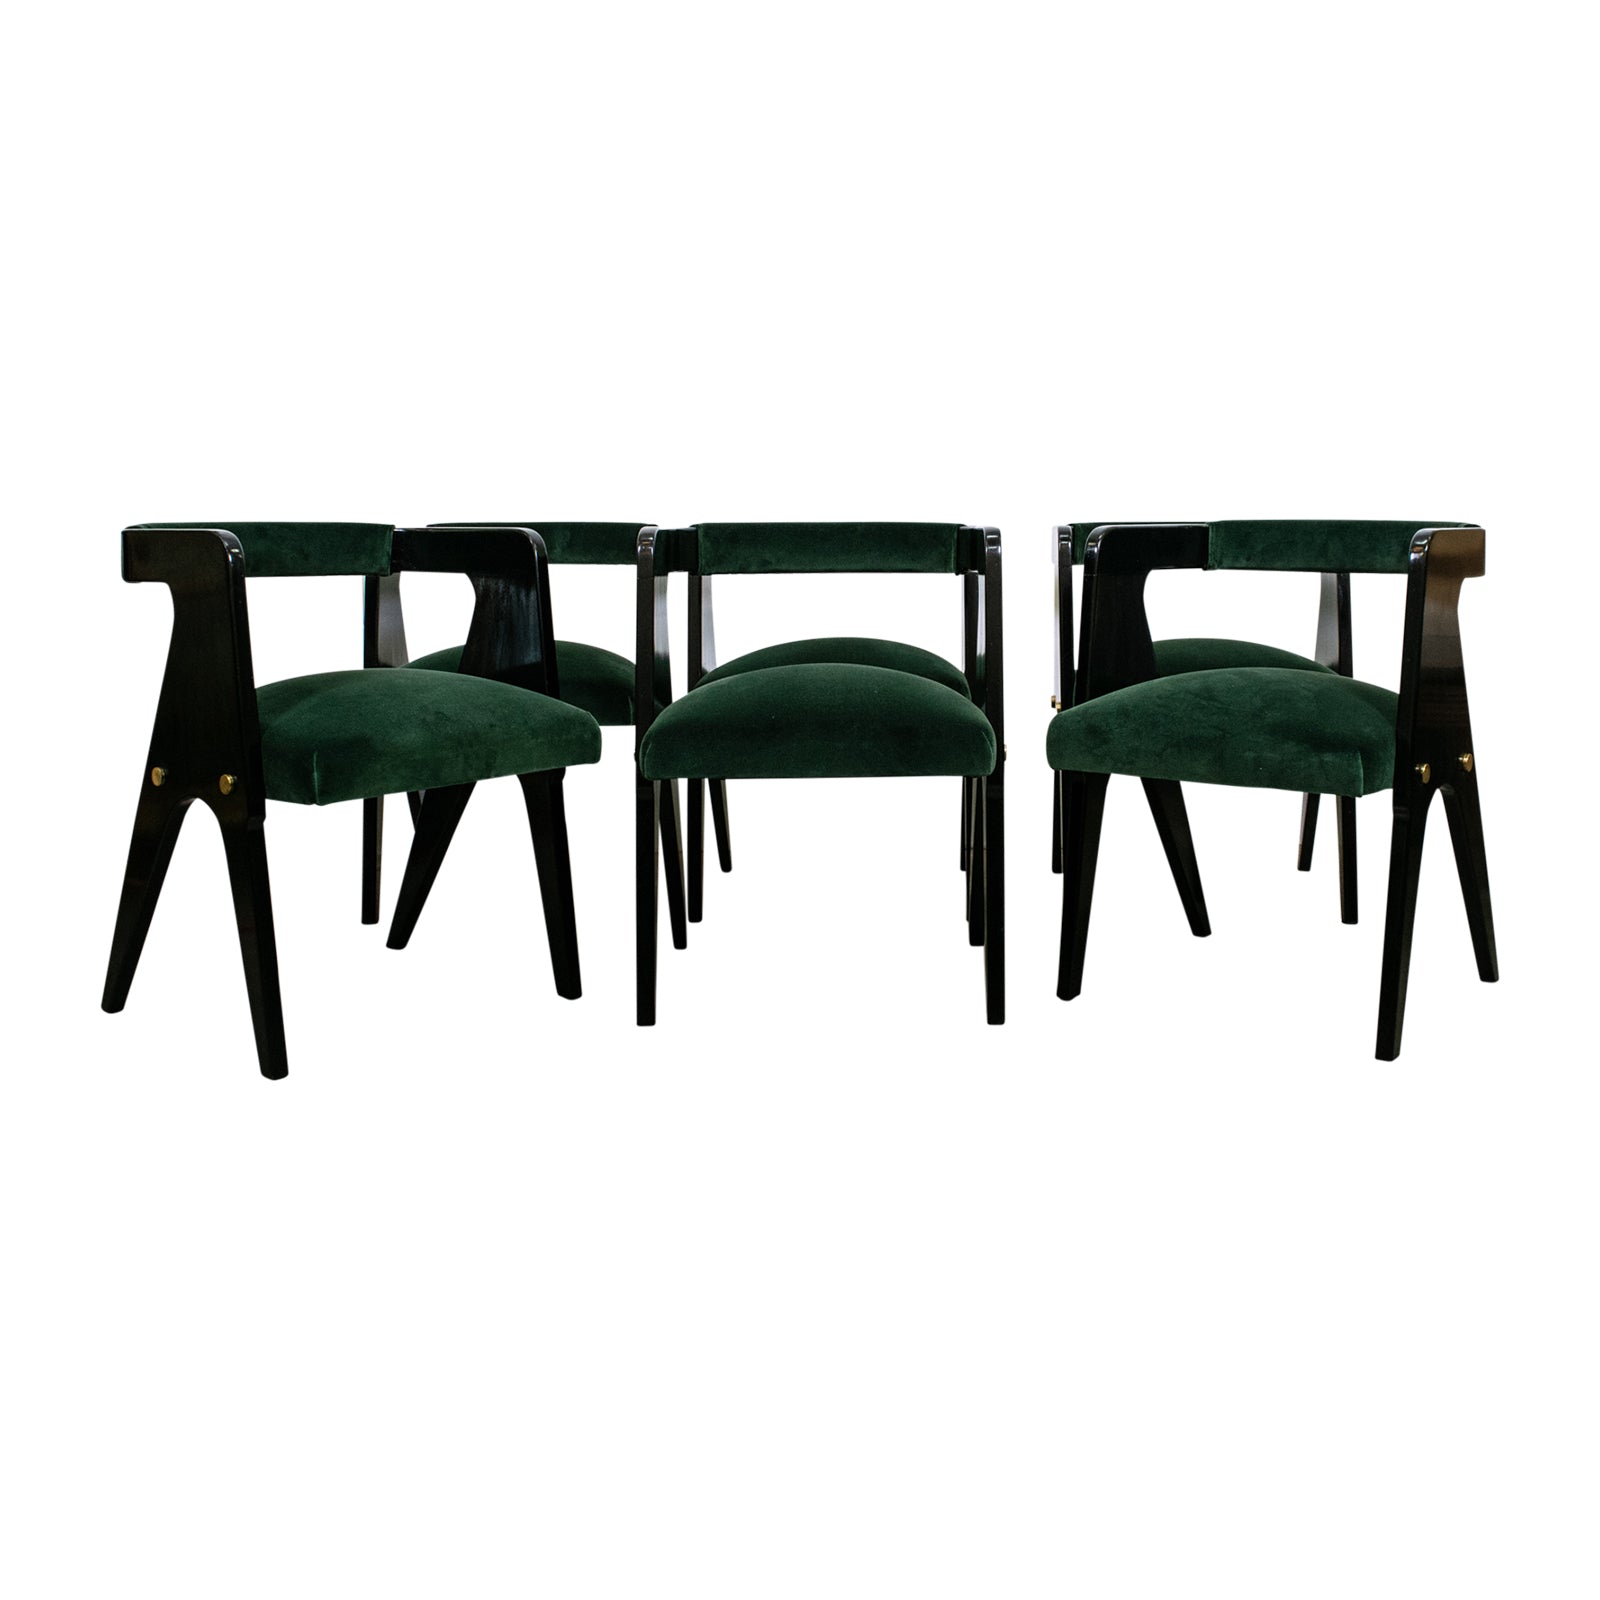 A set of six Australian Mid Century  "compass" Chairs attributed to Schulim Krimper